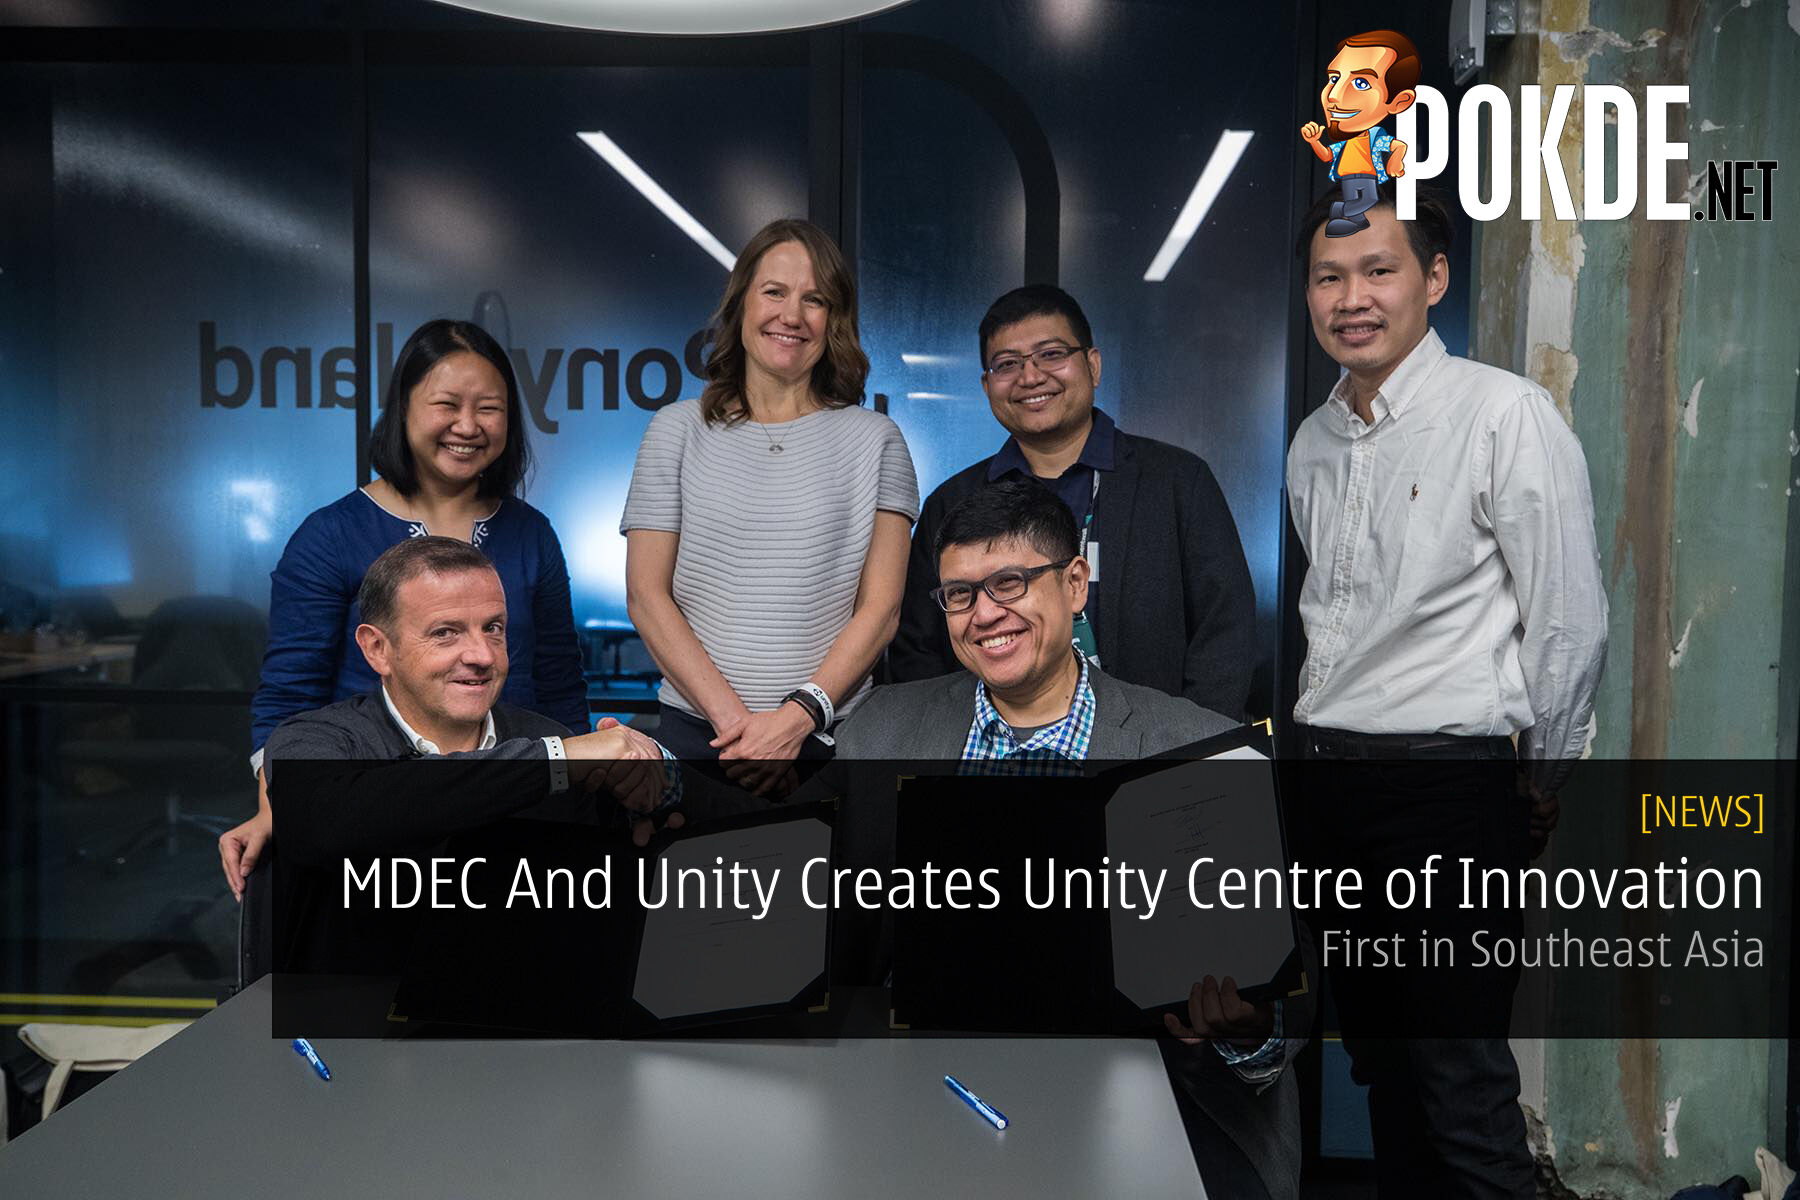 MDEC And Unity Creates Unity Centre of Innovation In Malaysia - First in Southeast Asia 35